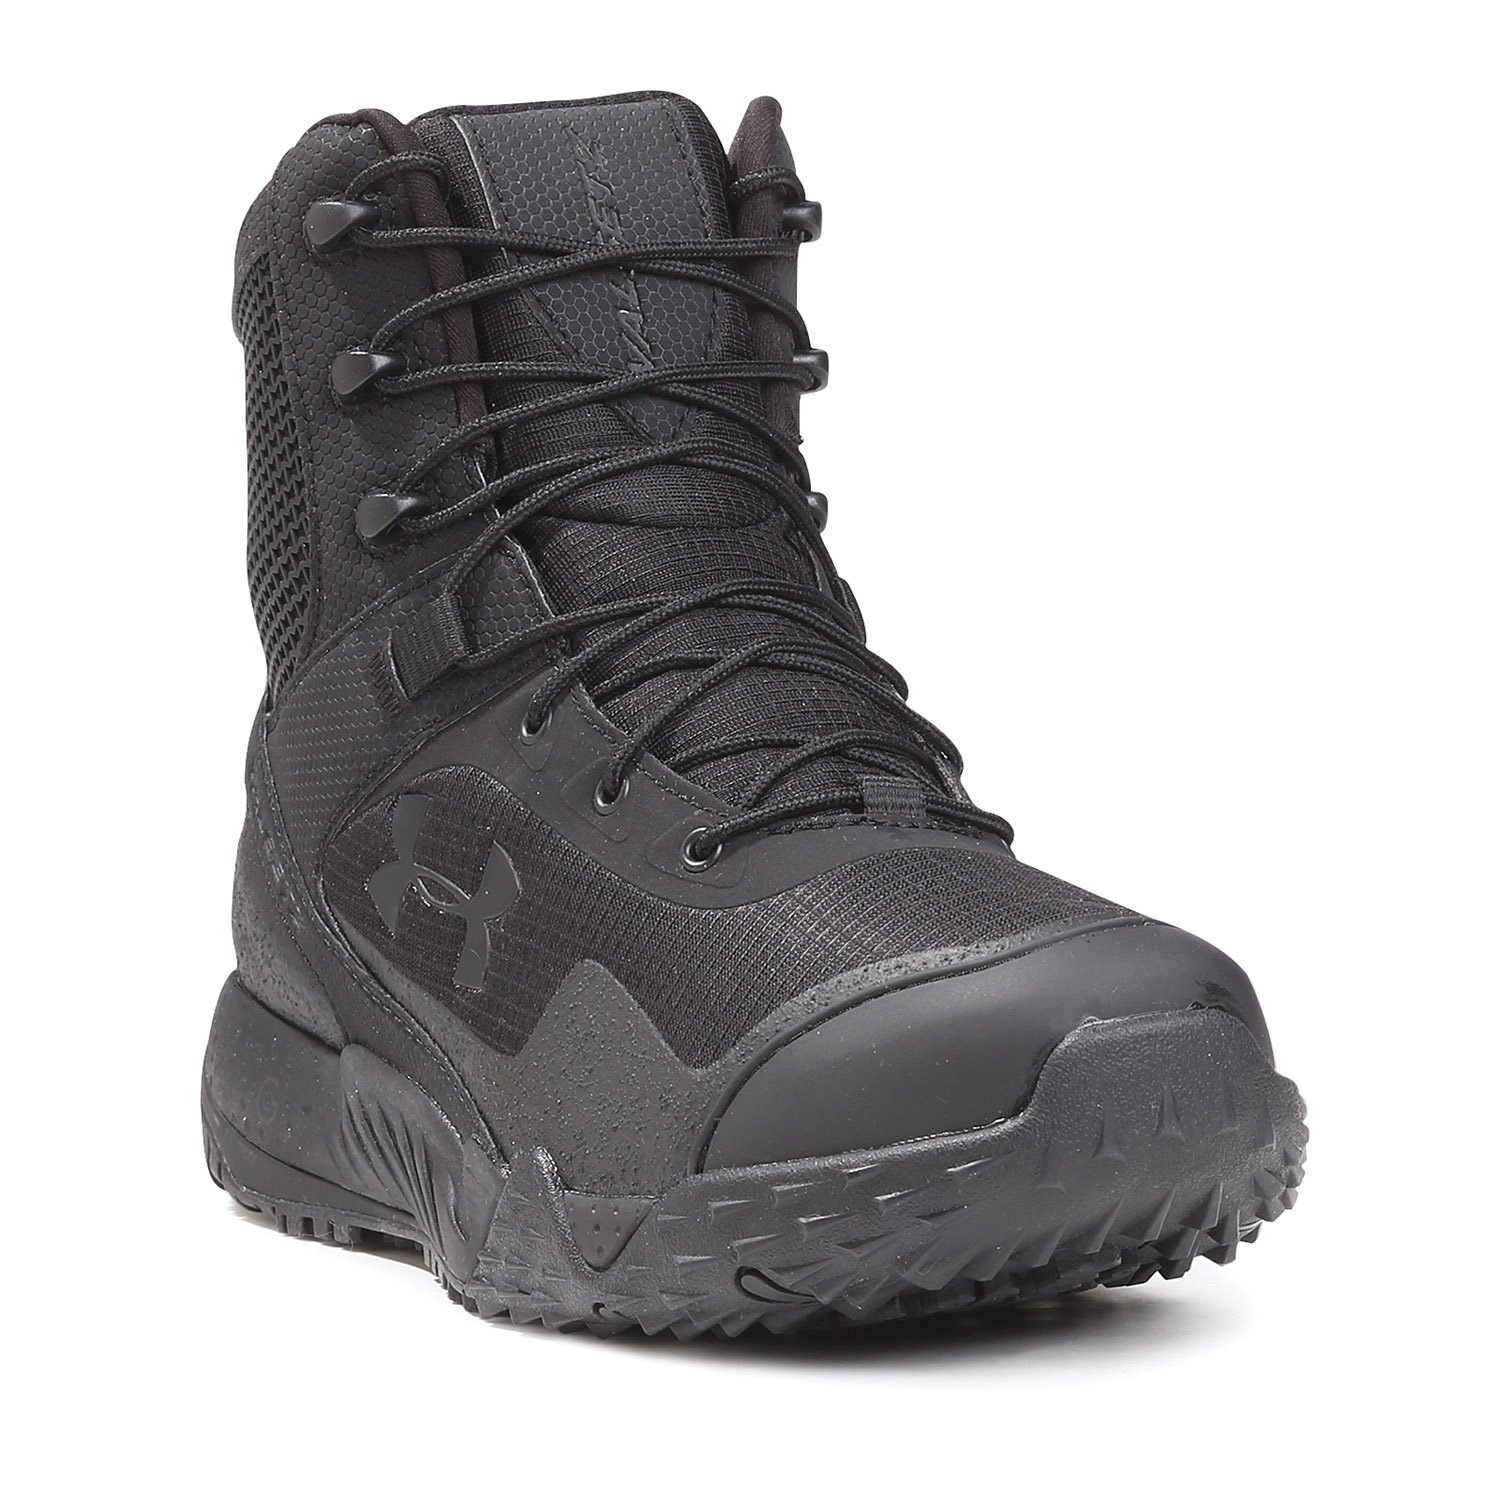 Cheap under armour boots black Buy 